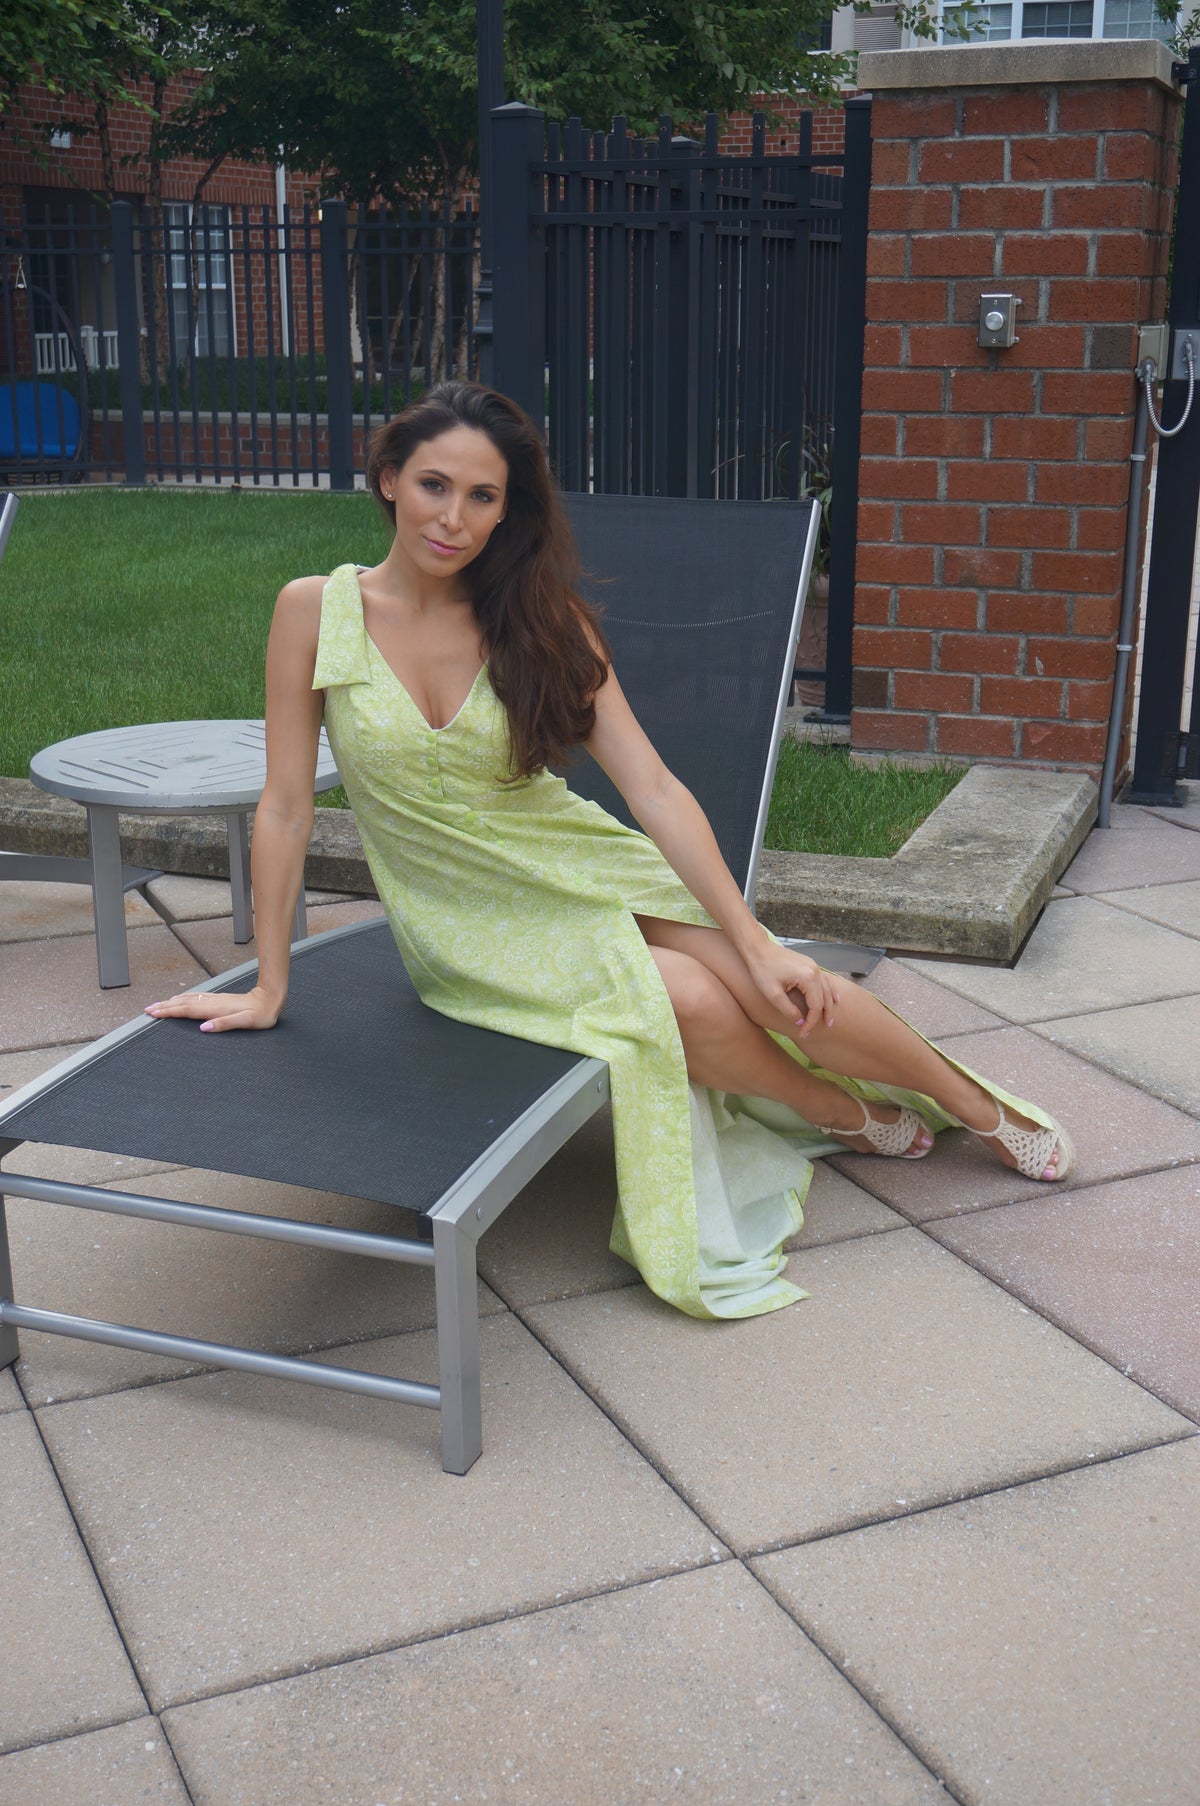 Model wearing a light green maxi dress sitting on a lounge chair.